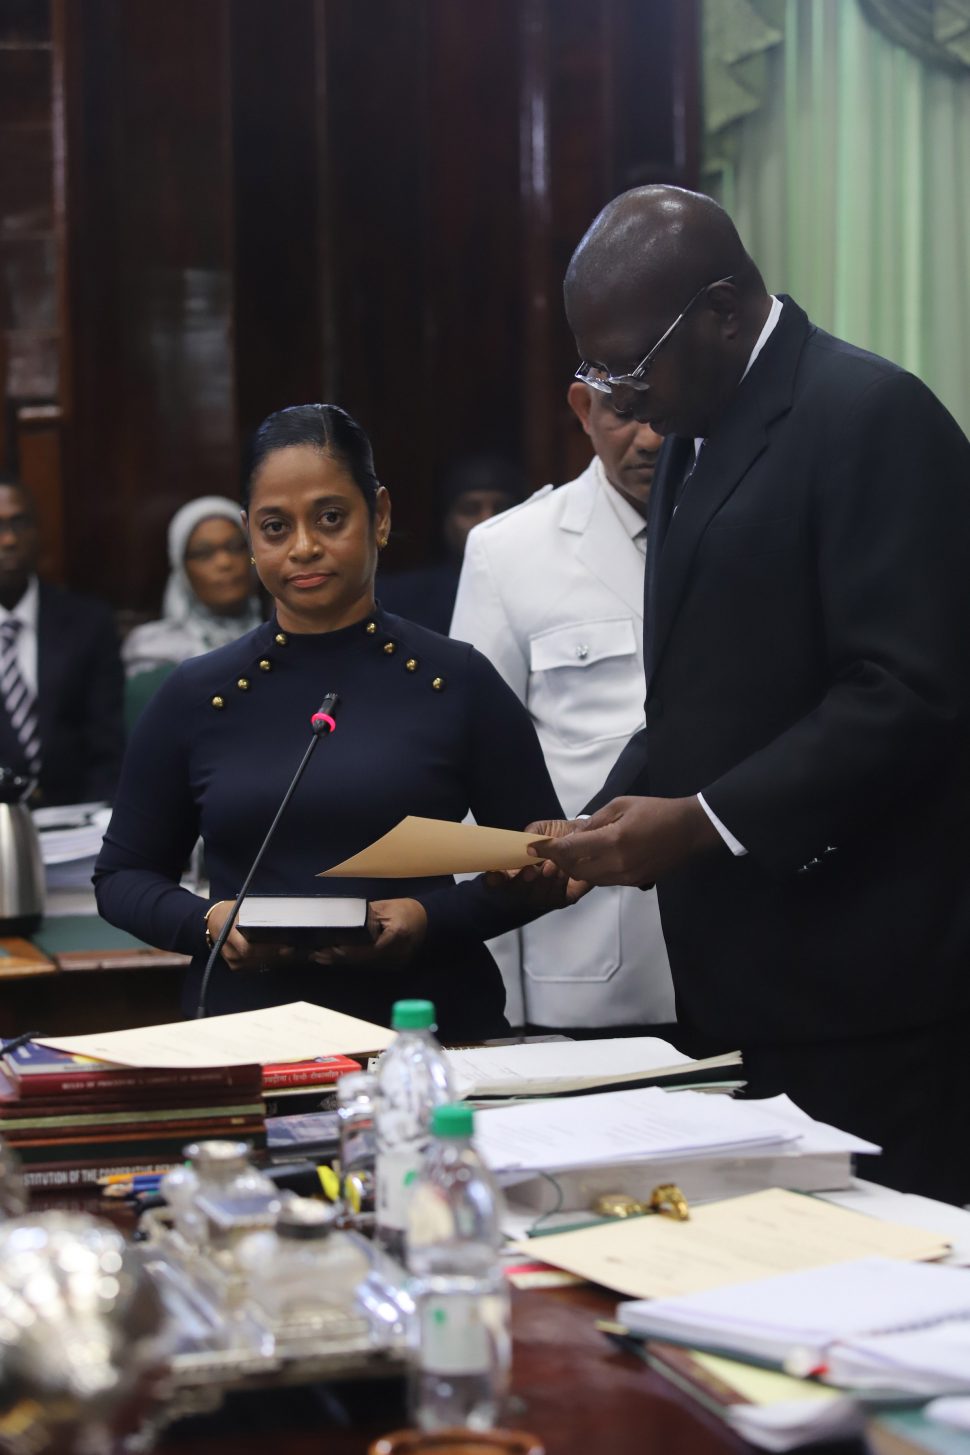 Donna Mathoo taking the oath as a new Member of Parliament